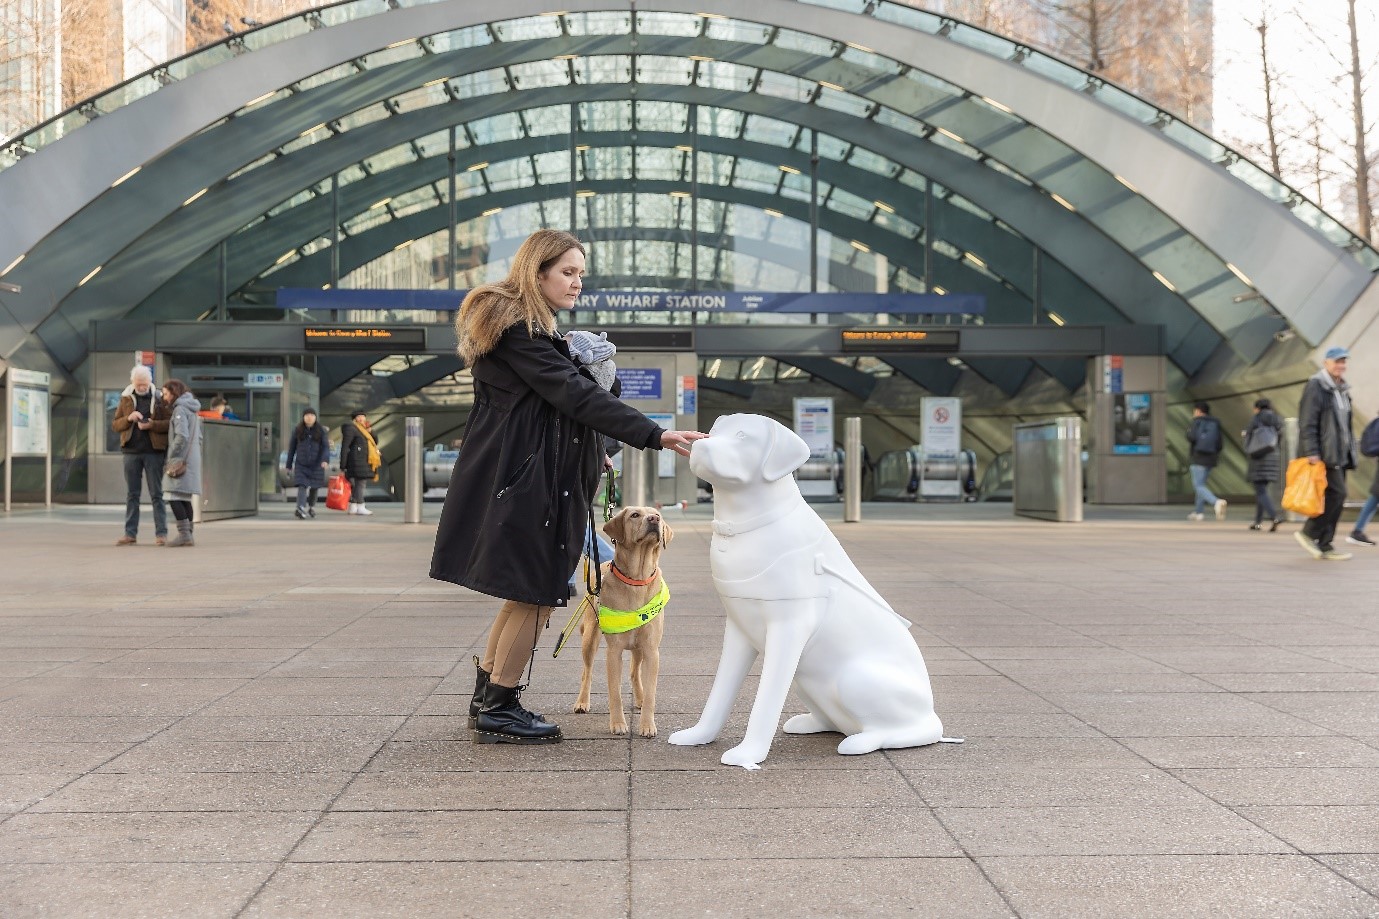 Guide dog owner with her yellow Labrador retriever guide dog standing next to a blank white guide dog sculpture in front of Canary Wharf tube station.